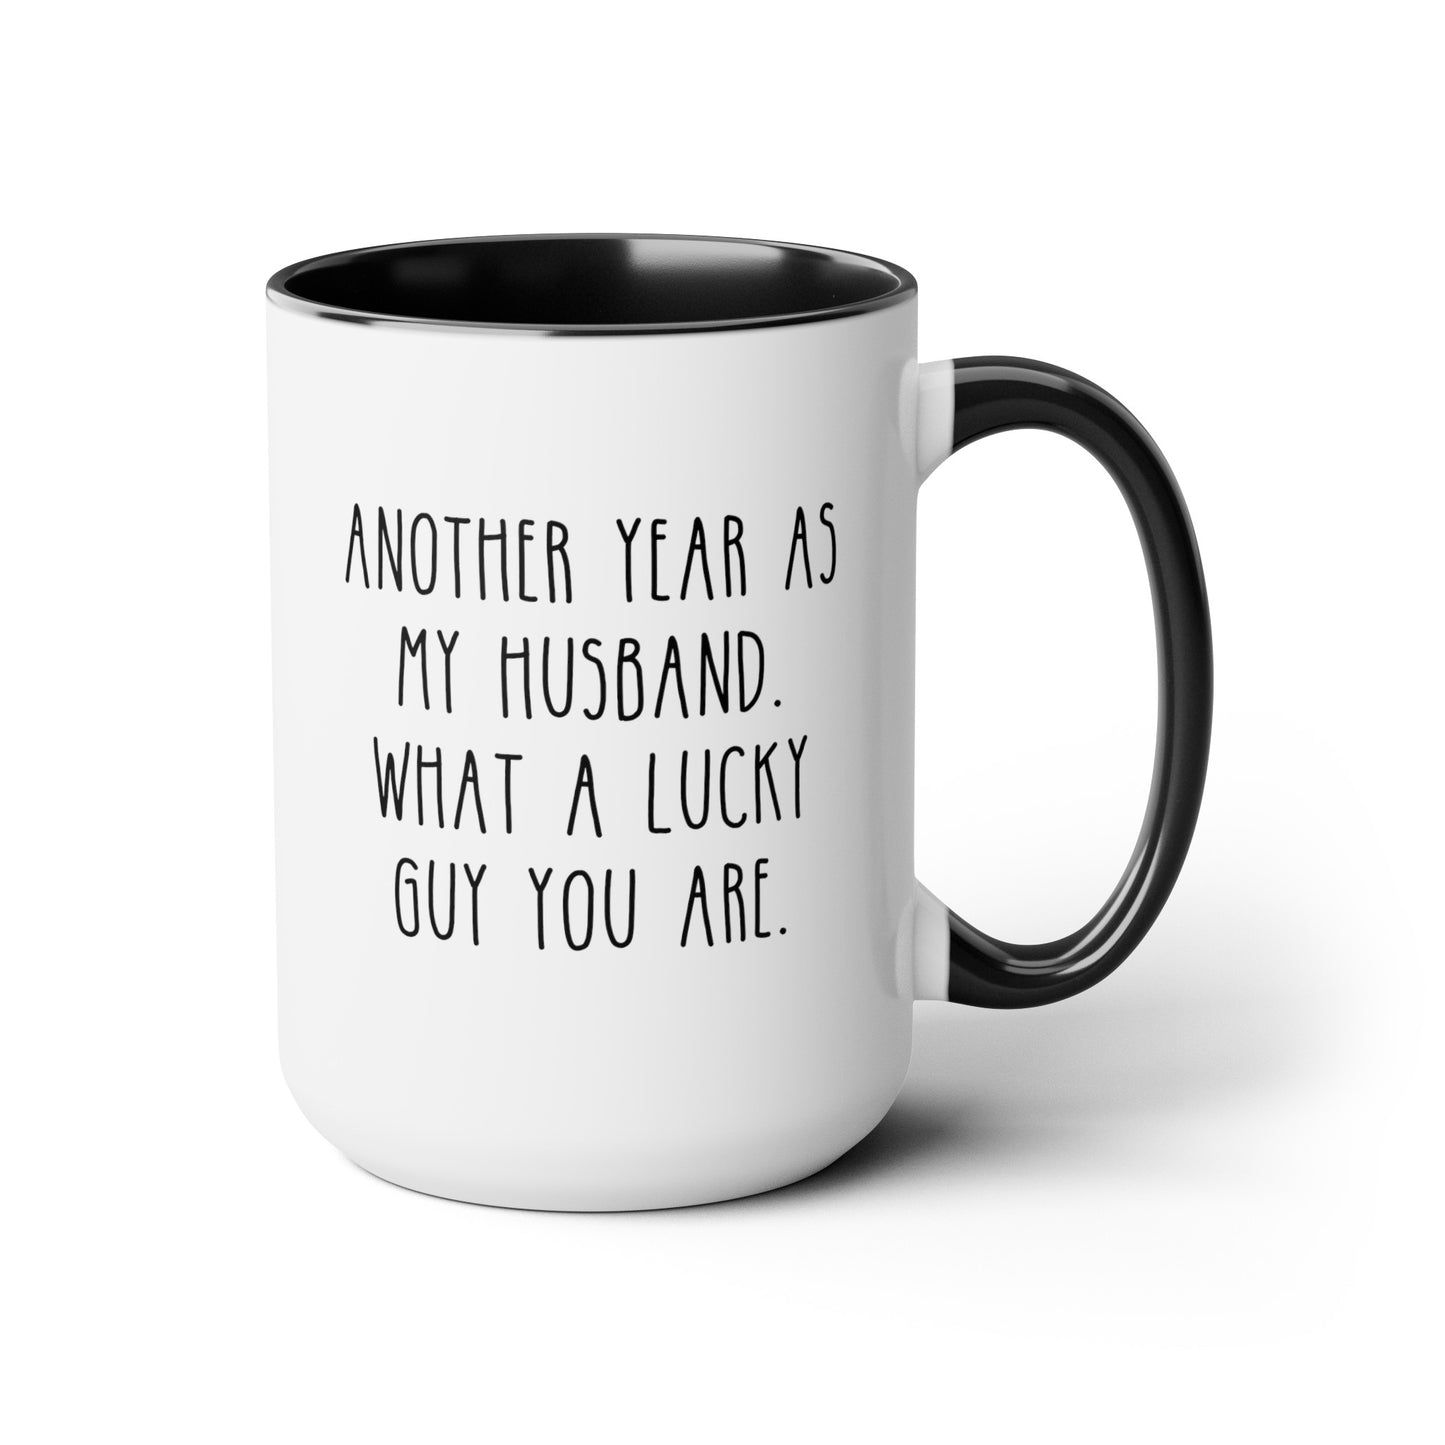 Another Year As My Husband What A Lucky Guy You Are 15oz white with black accent funny large coffee mug gift for Valentines sarcastic hubby fiance wedding anniversary waveywares wavey wares wavywares wavy wares